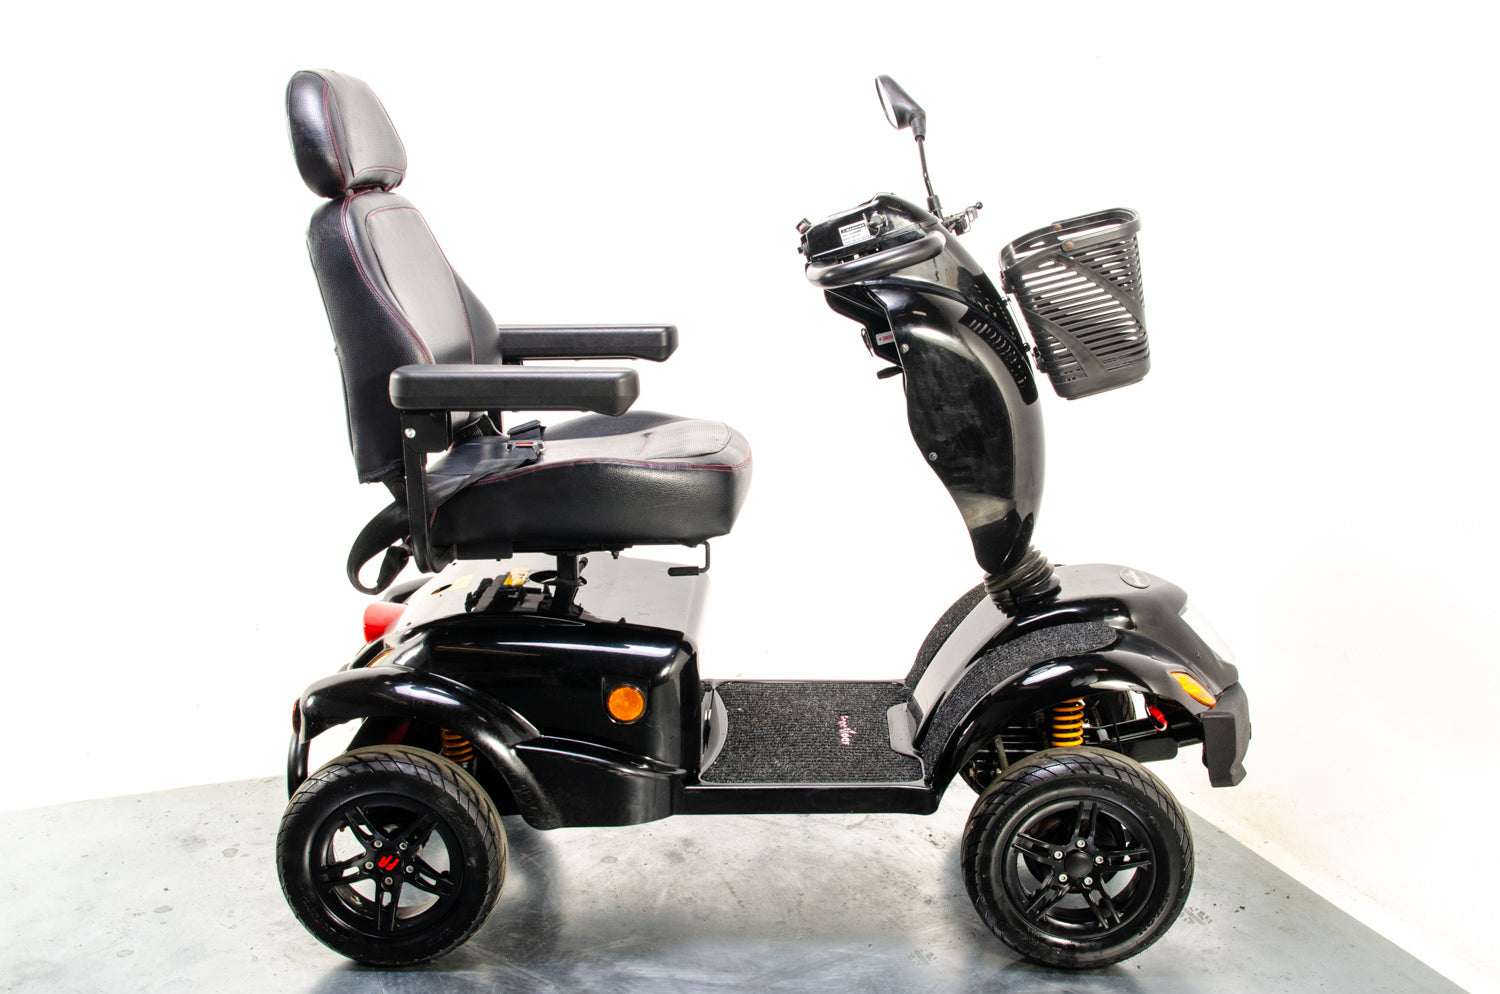 Freerider Landranger XL8 8mph Used Mobility Scooter All-Terrain Off-Road Road Legal Large 03526